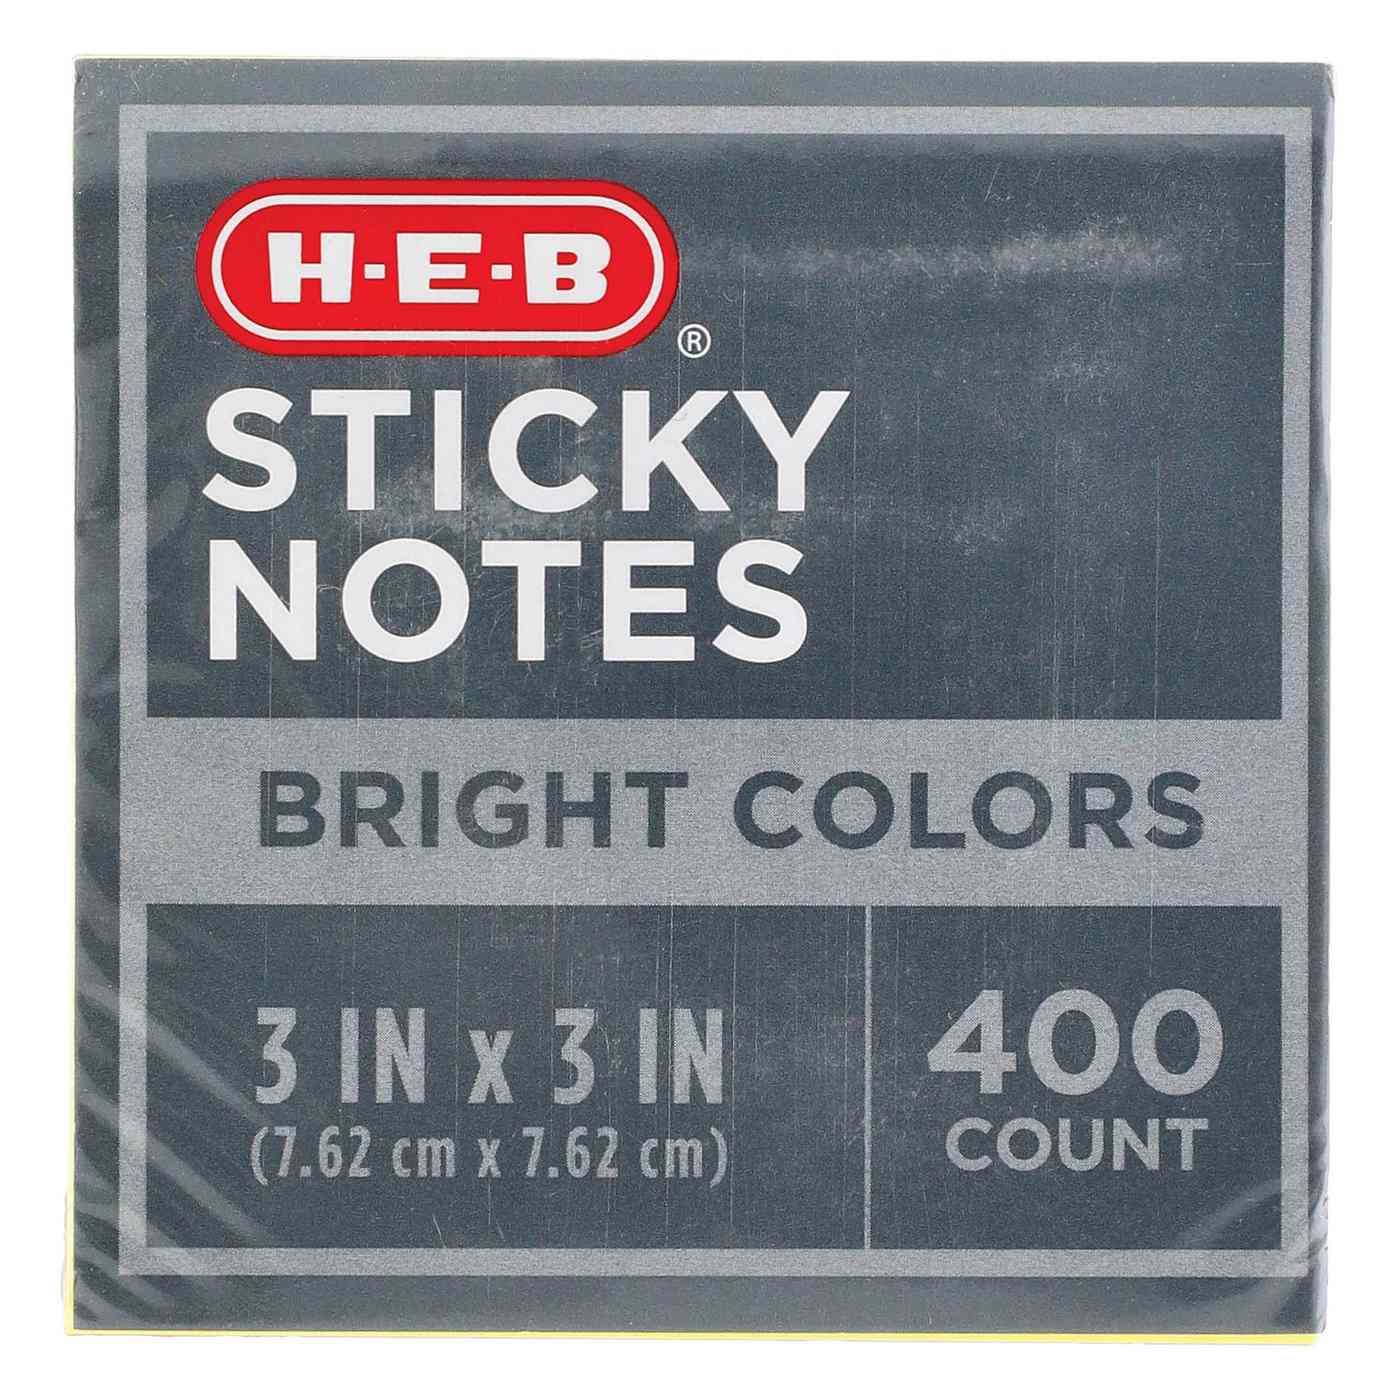 H-E-B Bright Colors Sticky Notes, 3"x3"; image 1 of 2